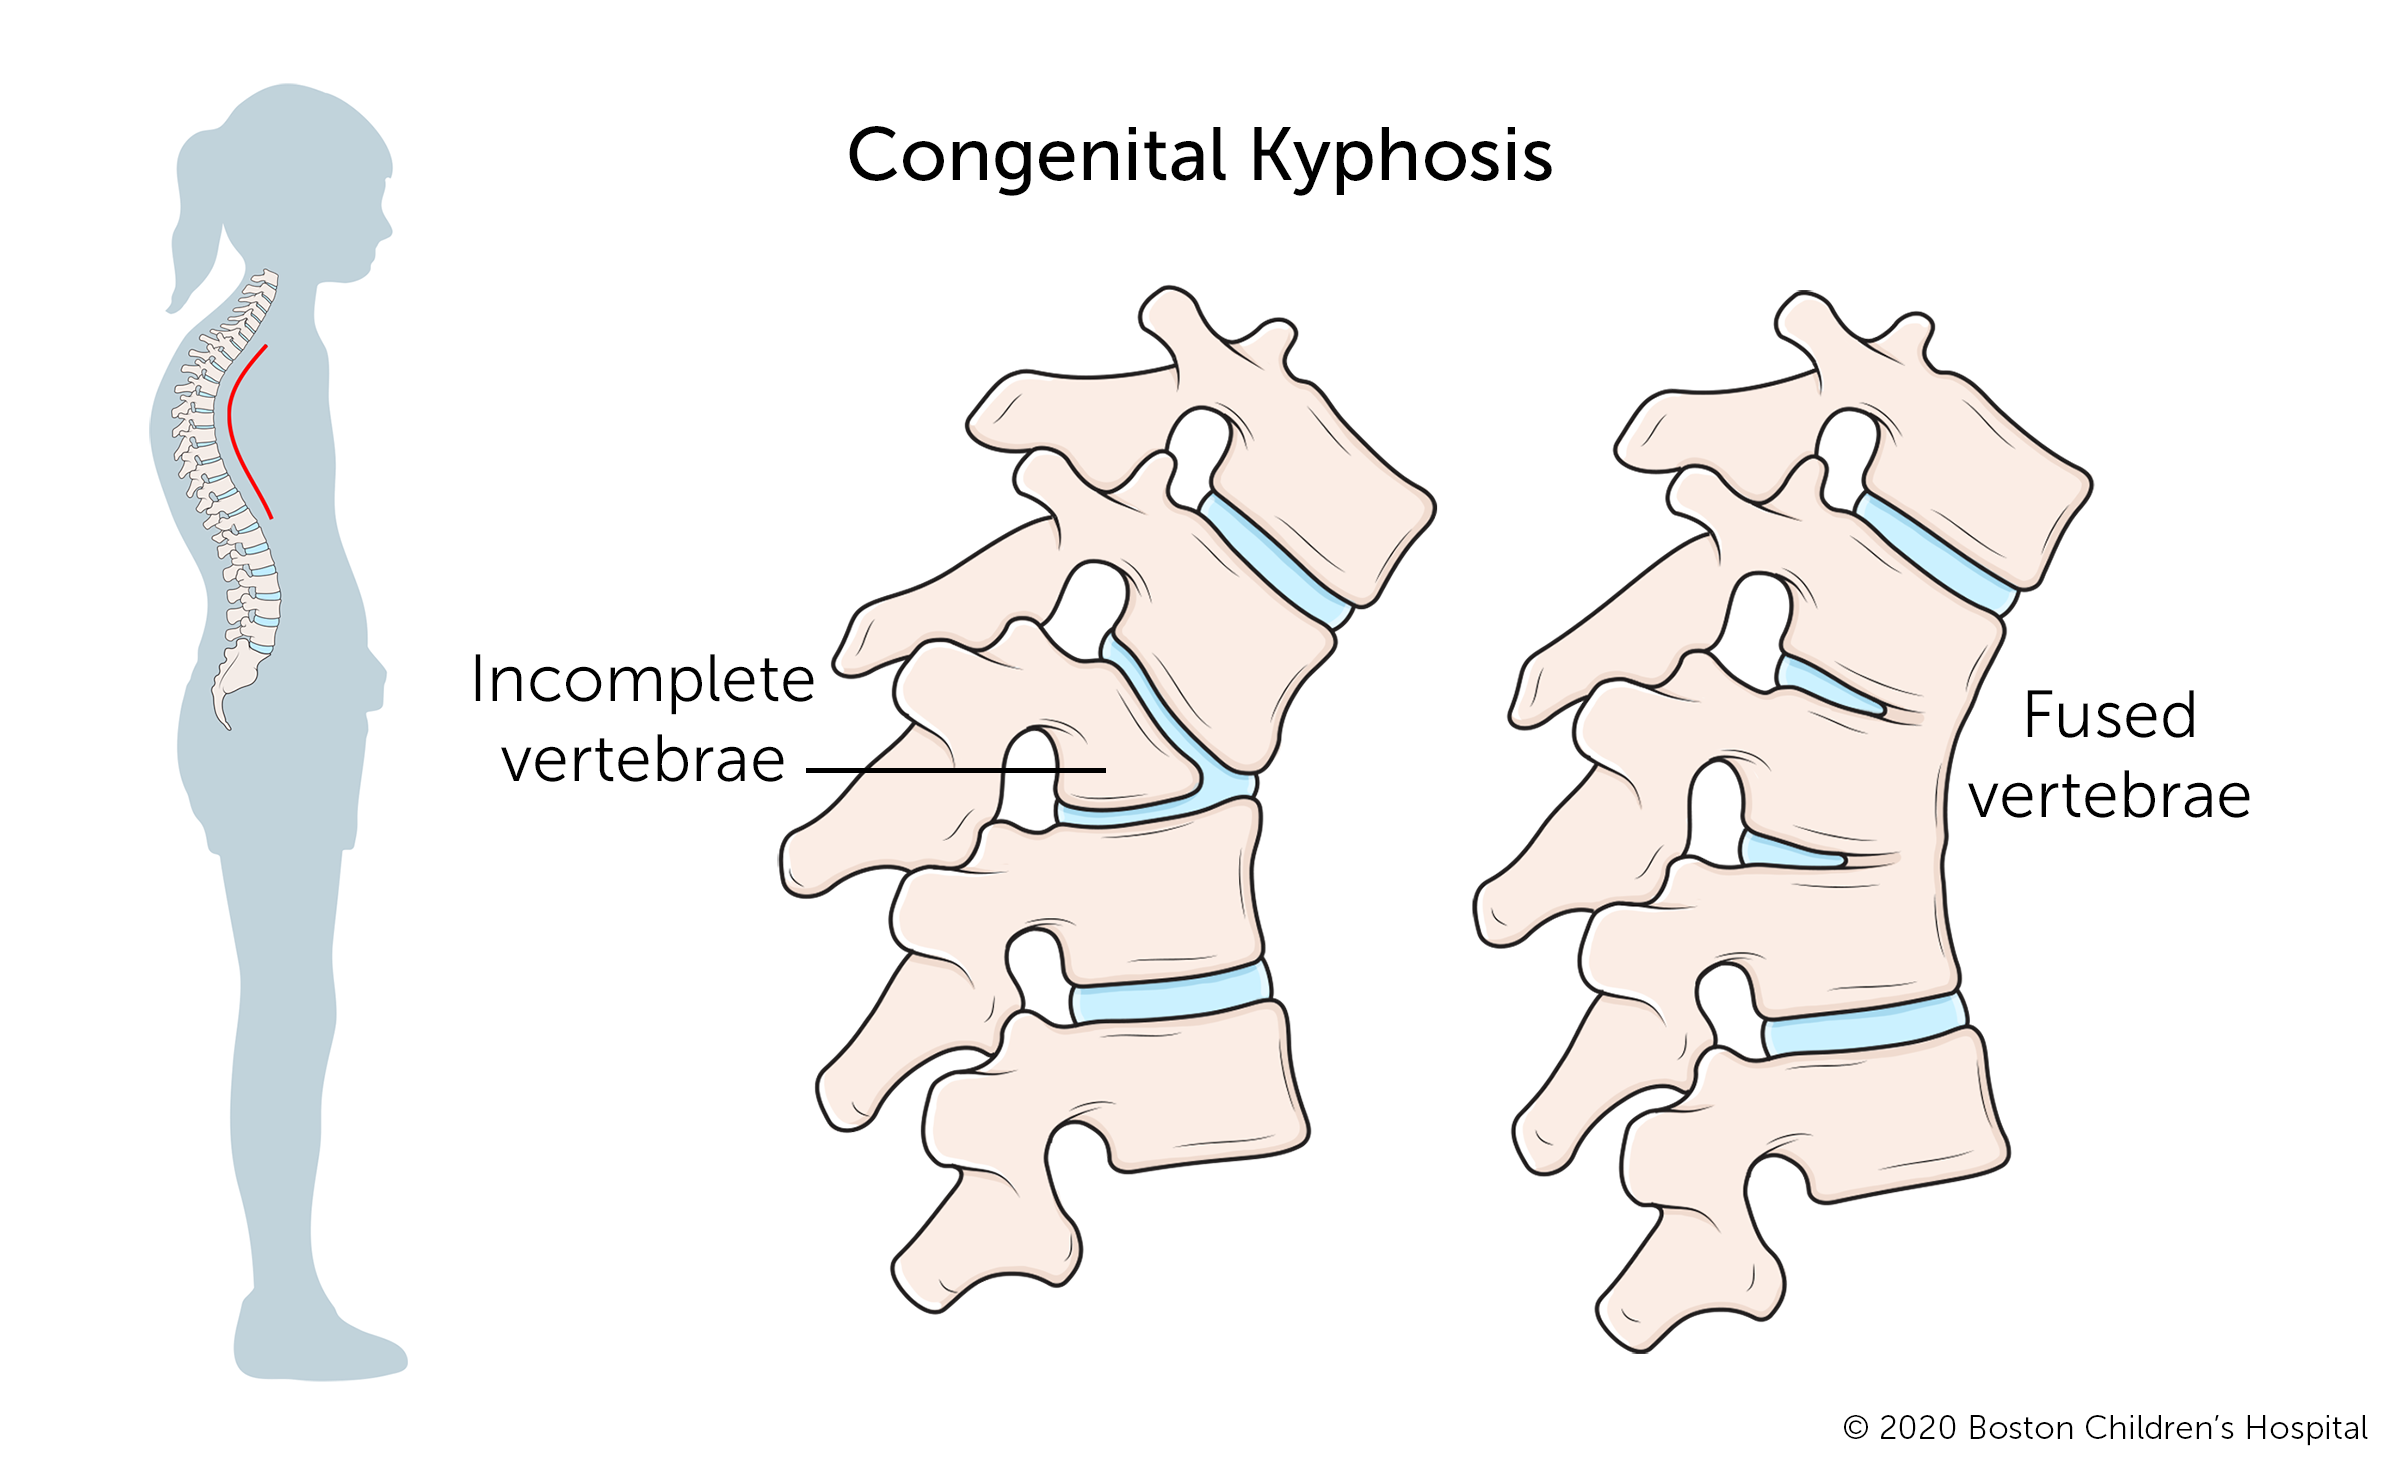 Congenital kyphosis often causes compression of the spinal cord and usually gets worse as the child grows.